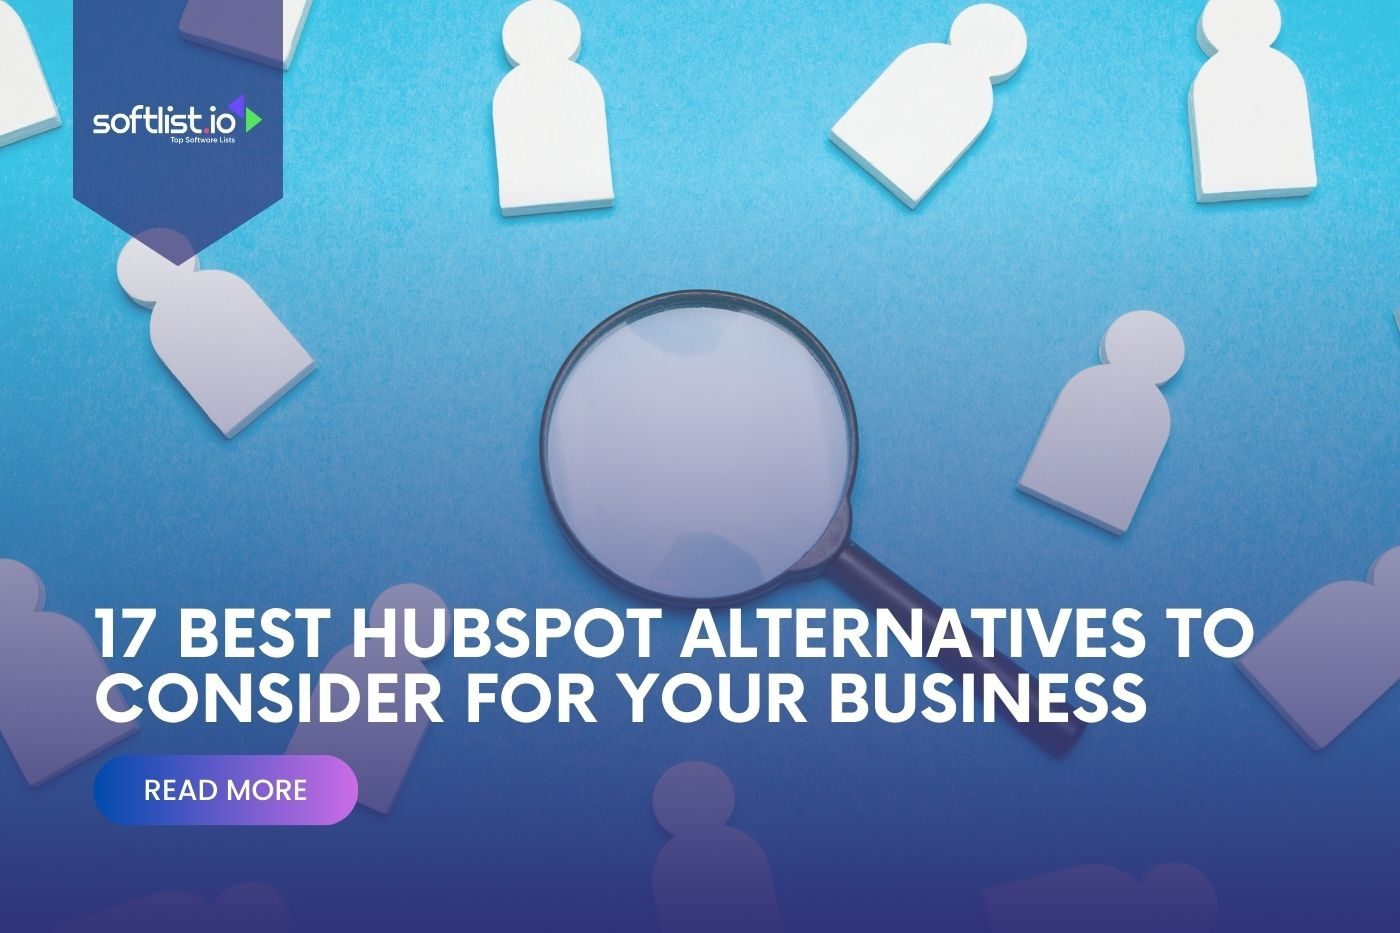 17 Best HubSpot Alternatives to Consider for Your Business